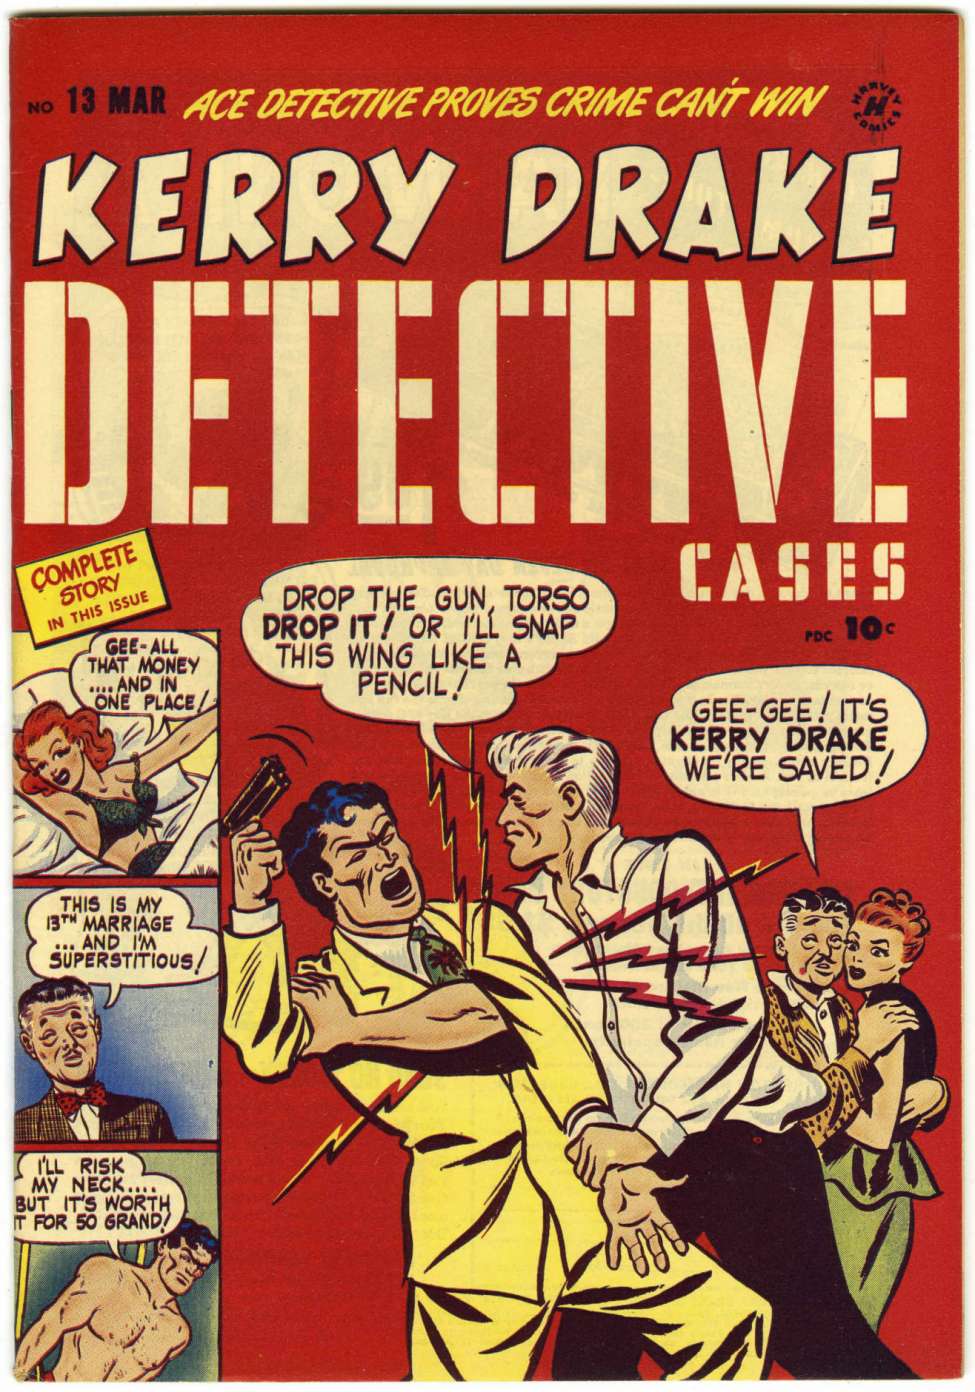 Comic Book Cover For Kerry Drake Detective Cases 13